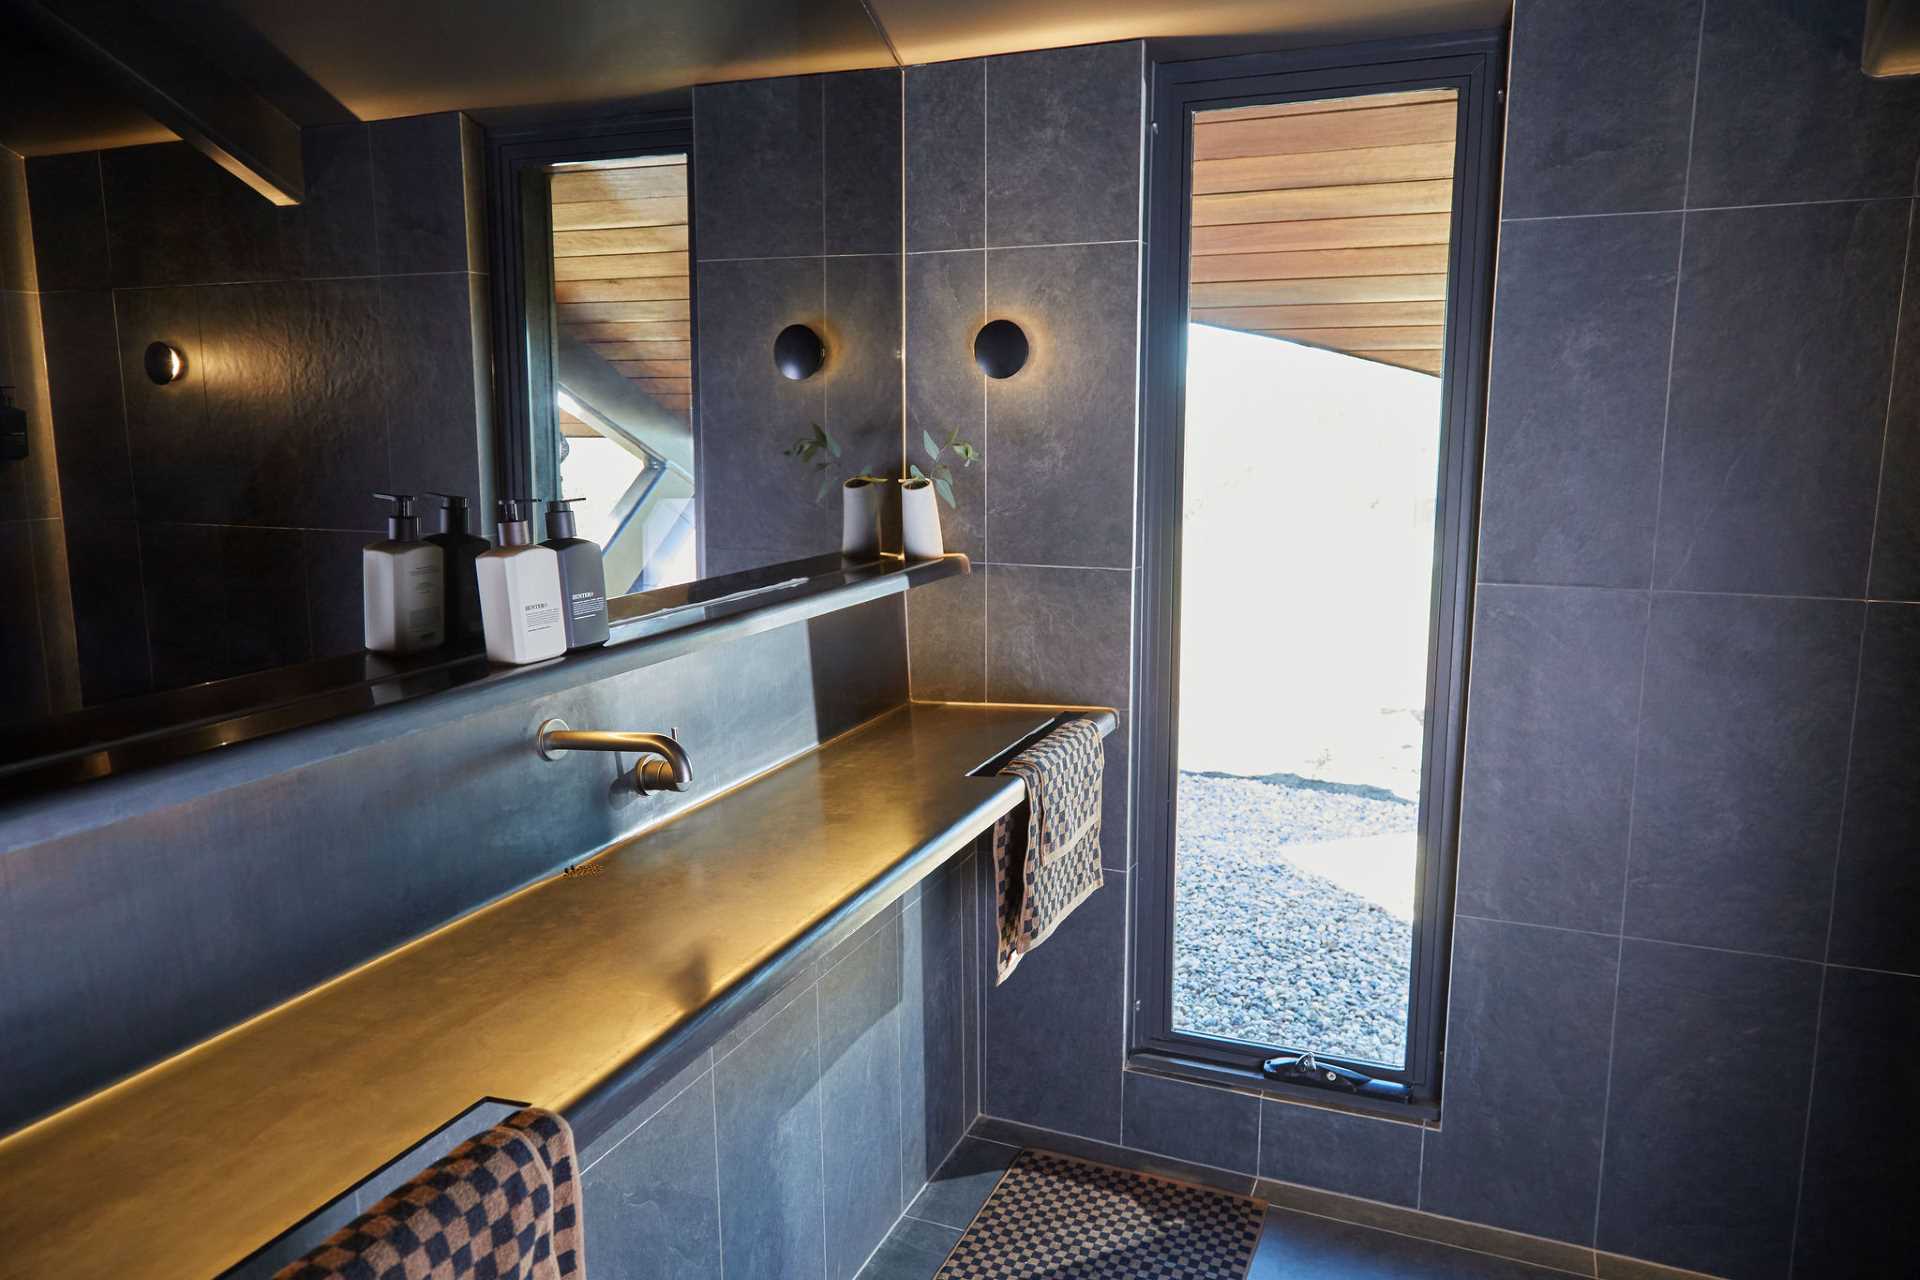 The small bathroom of this modern cabin includes all of the necessities and a vertical window for natural light.